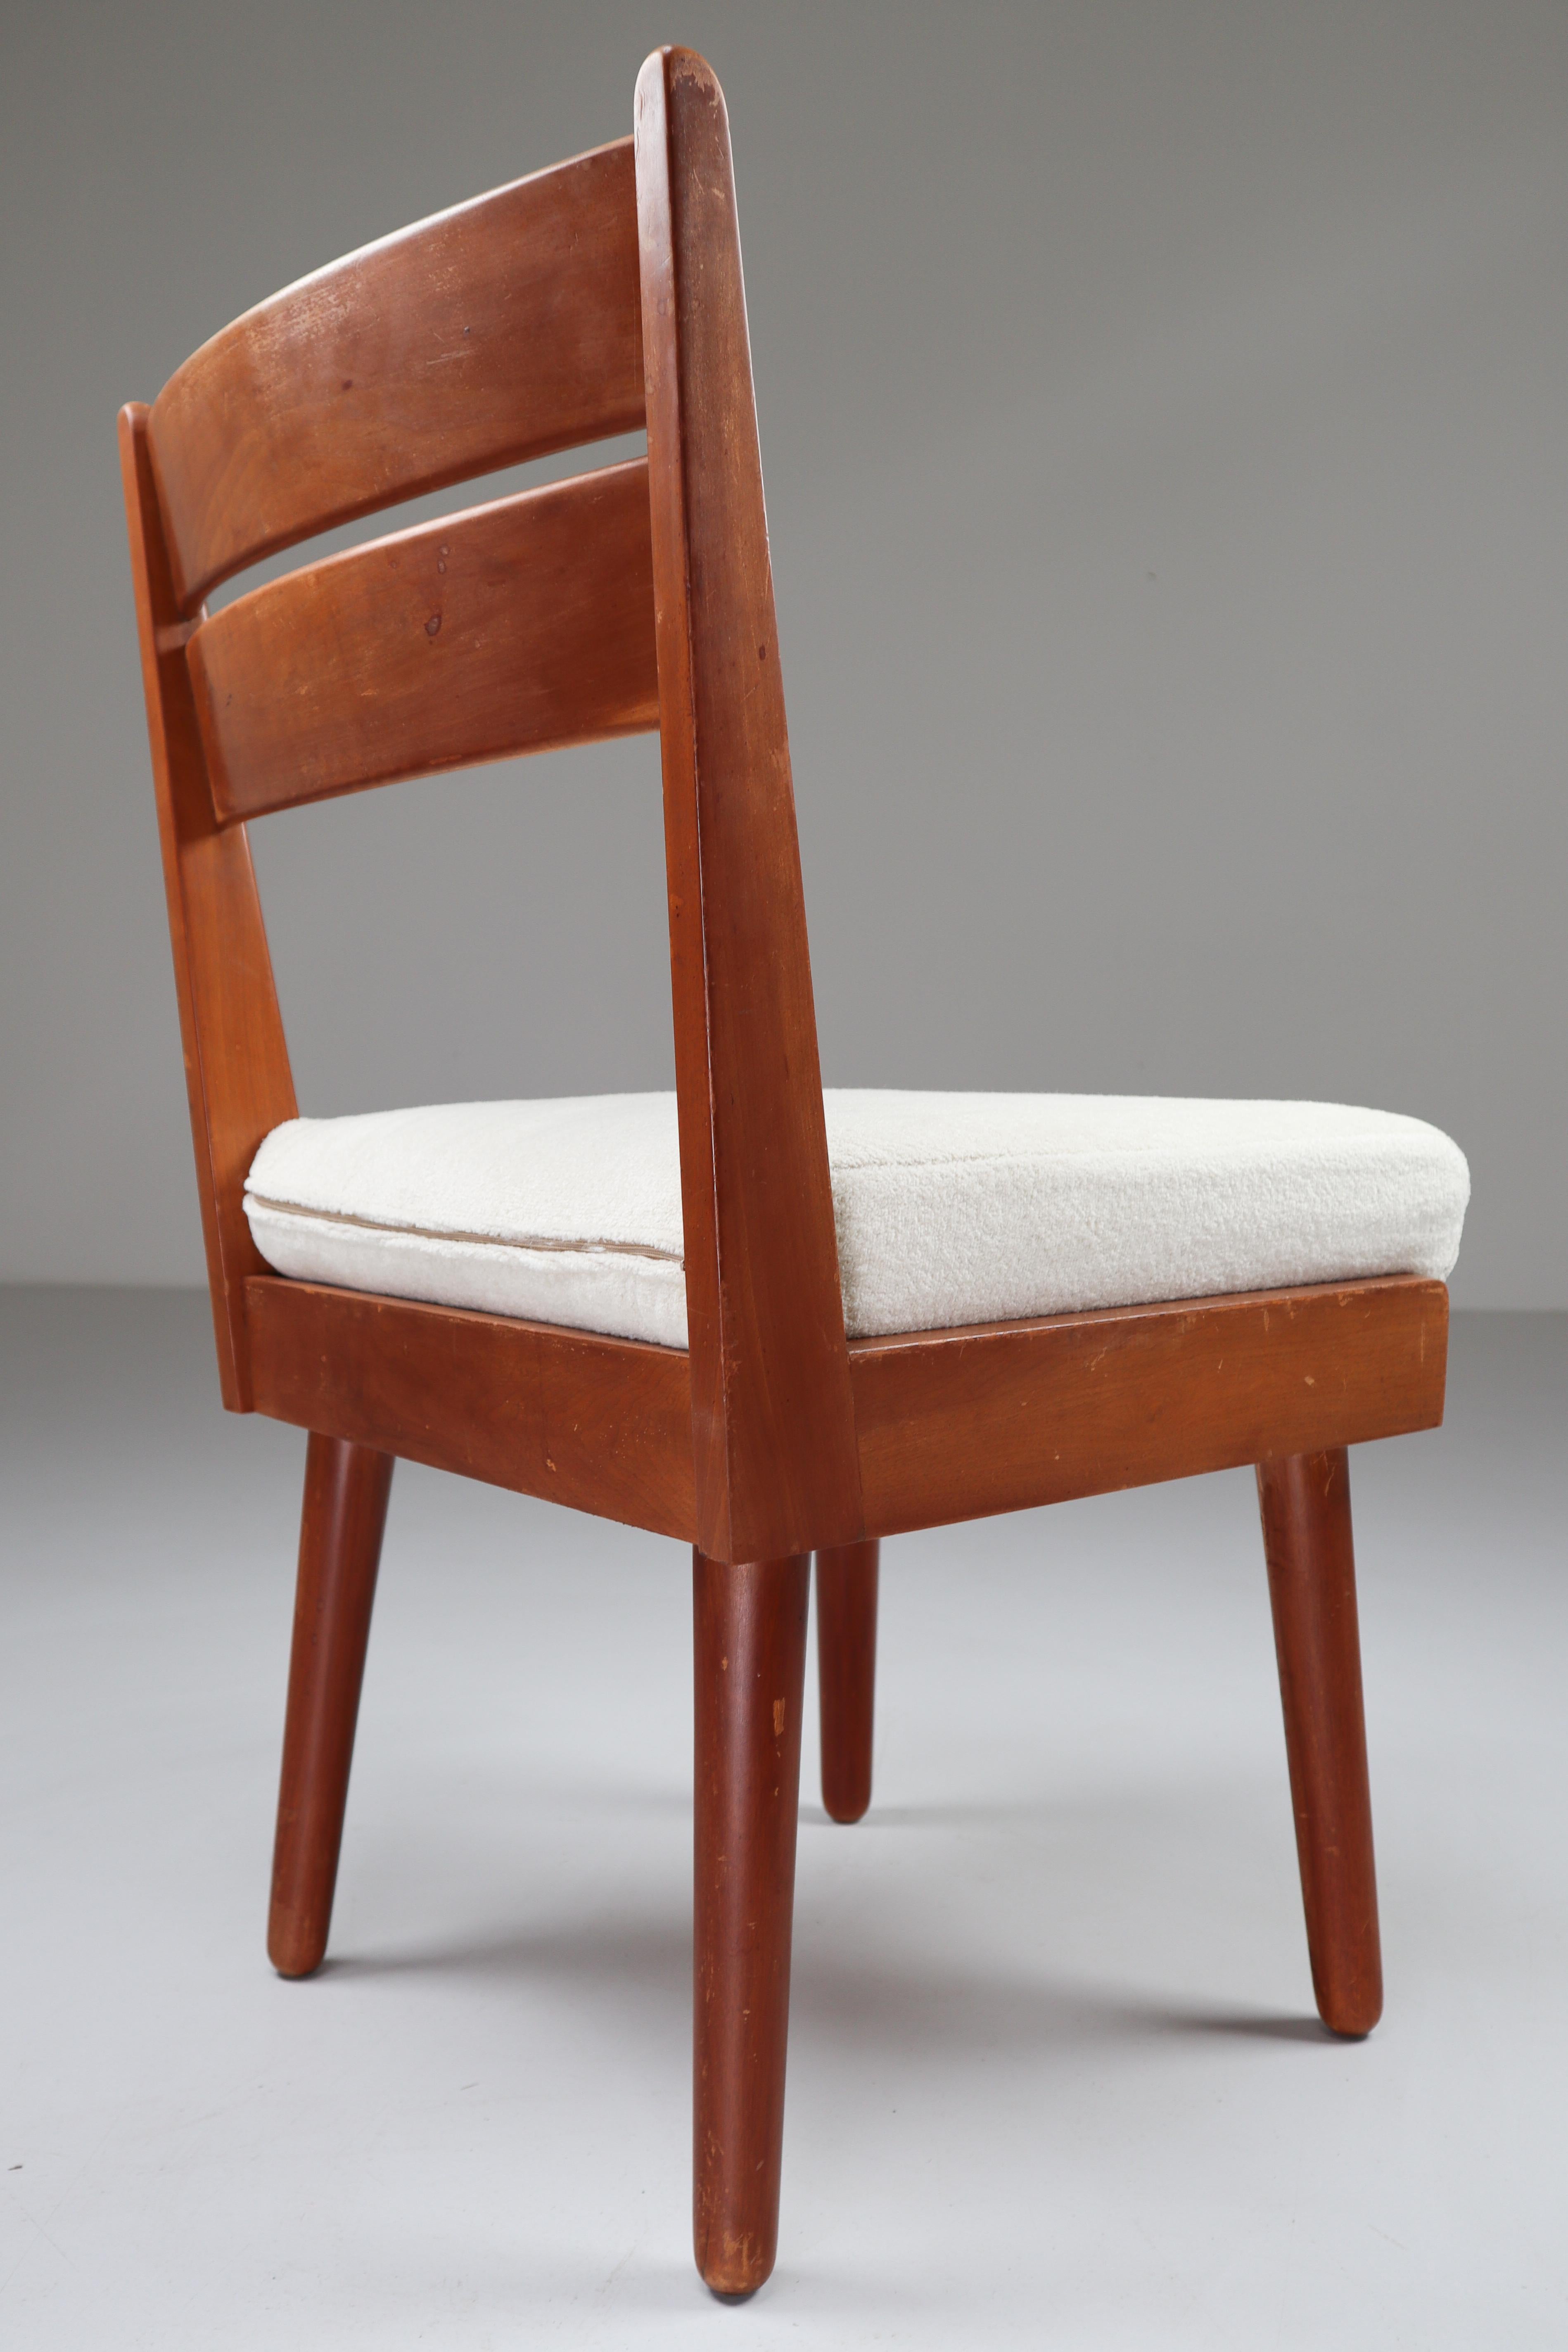 Chairs in solid walnut and re-upholstery crème, white Fabric from France, 1950s. These chairs would make an eye-catching addition to any interior such as living room, family room, screening room or even in the office. It also perfectly fits in a